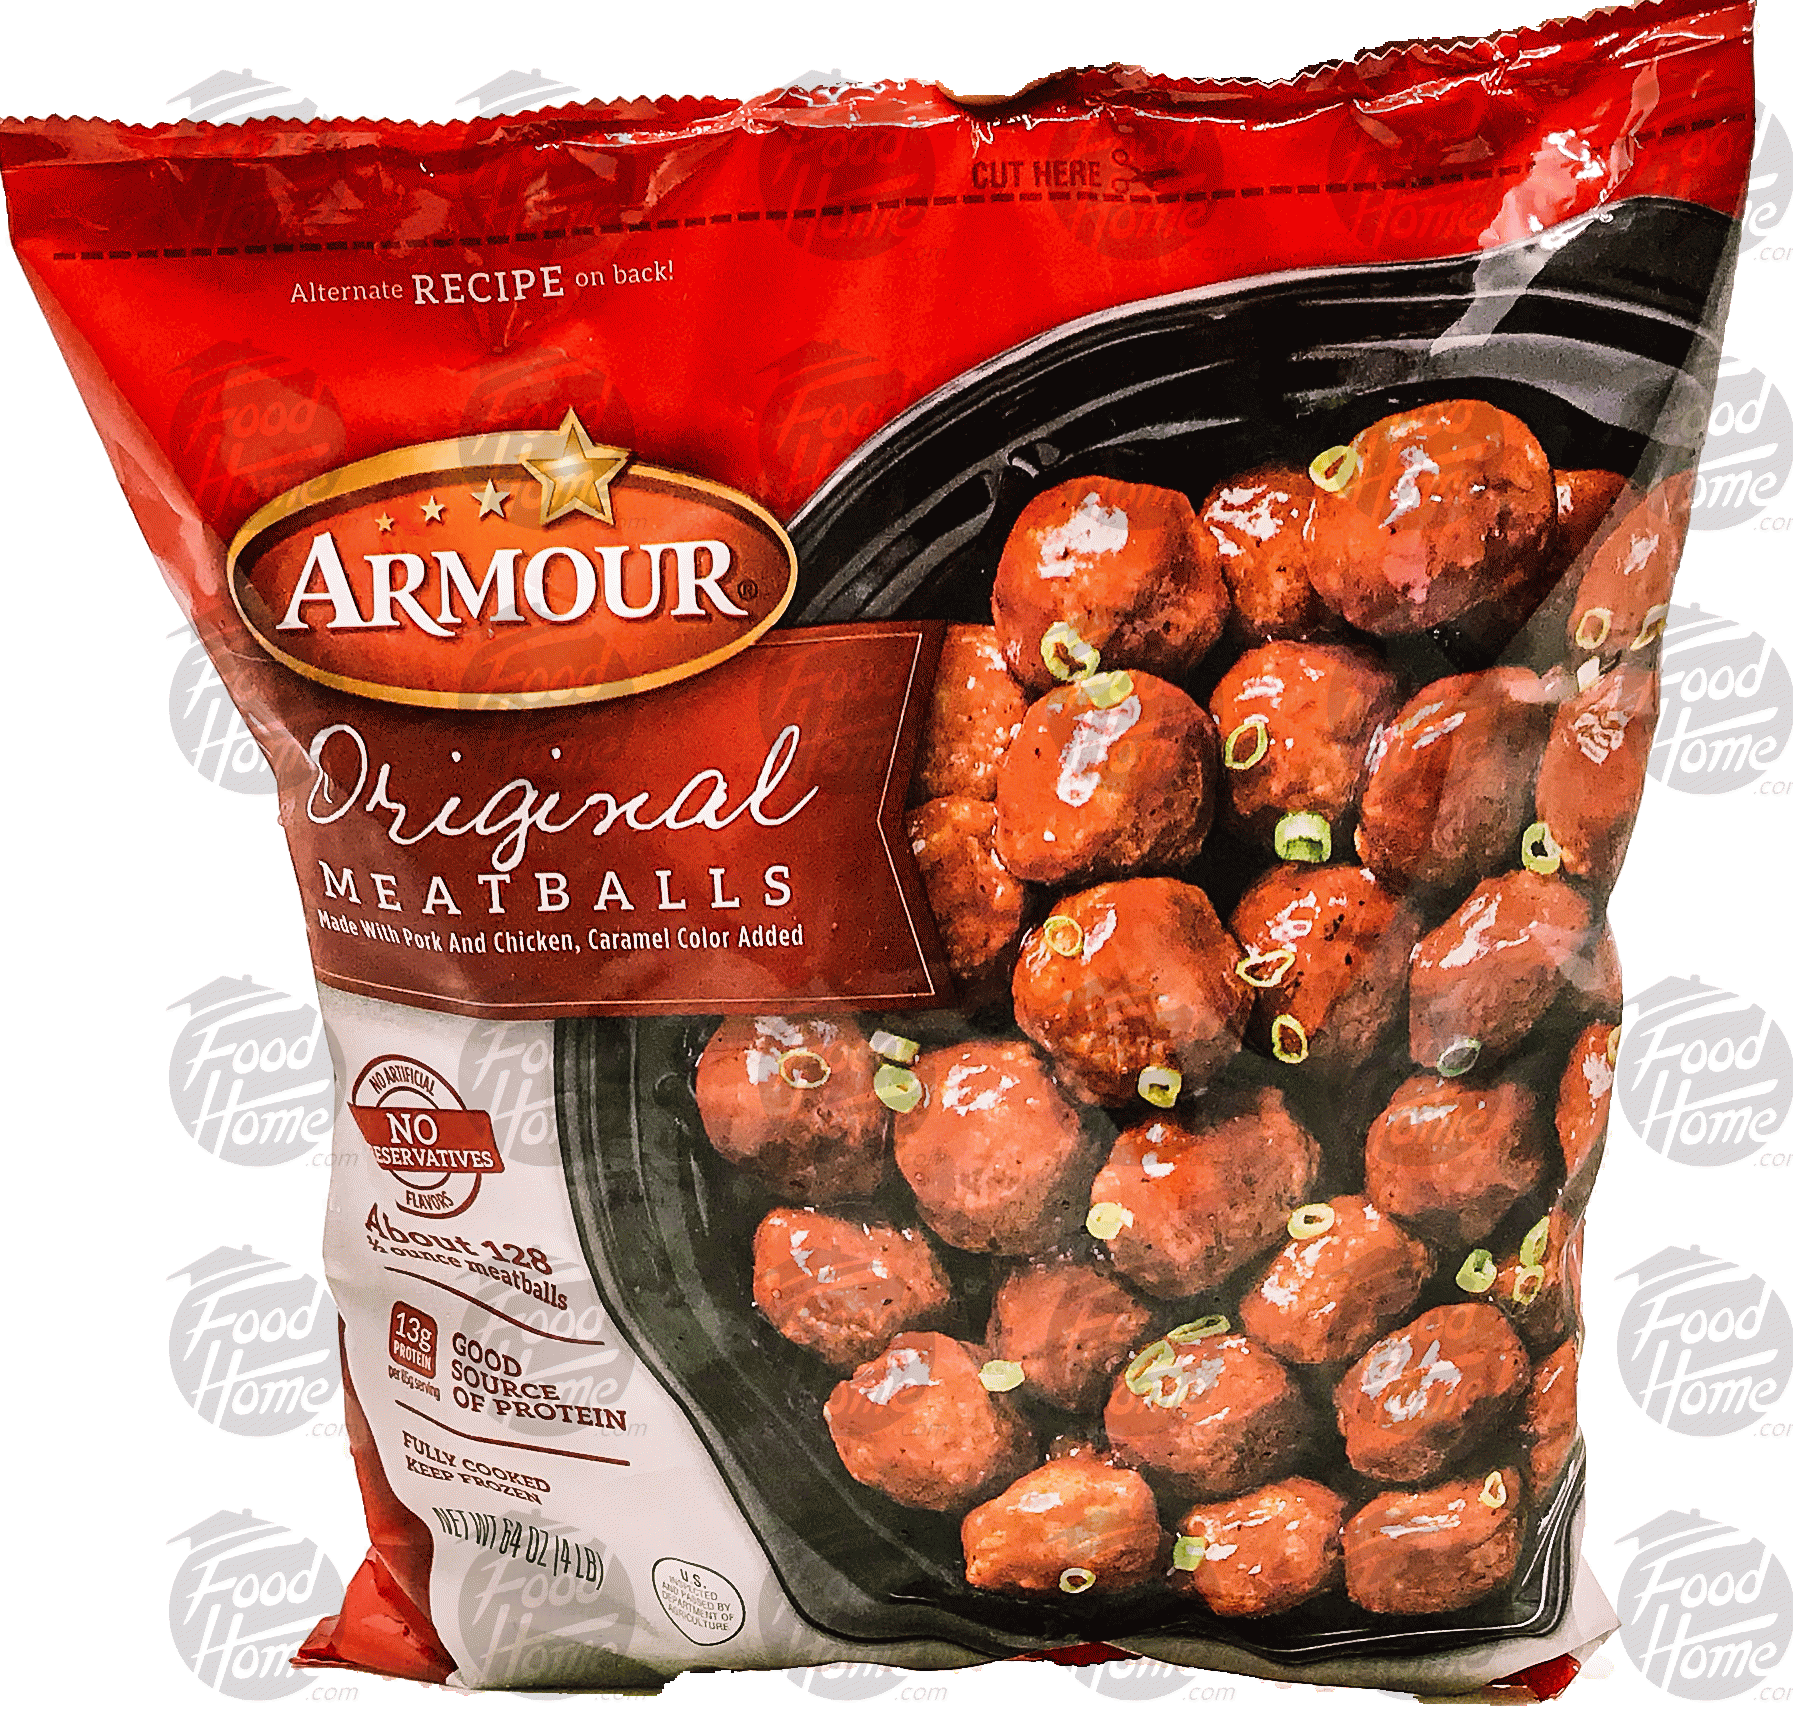 Armour  original meatballs, party size, over 120 fully-cooked meatballs Full-Size Picture